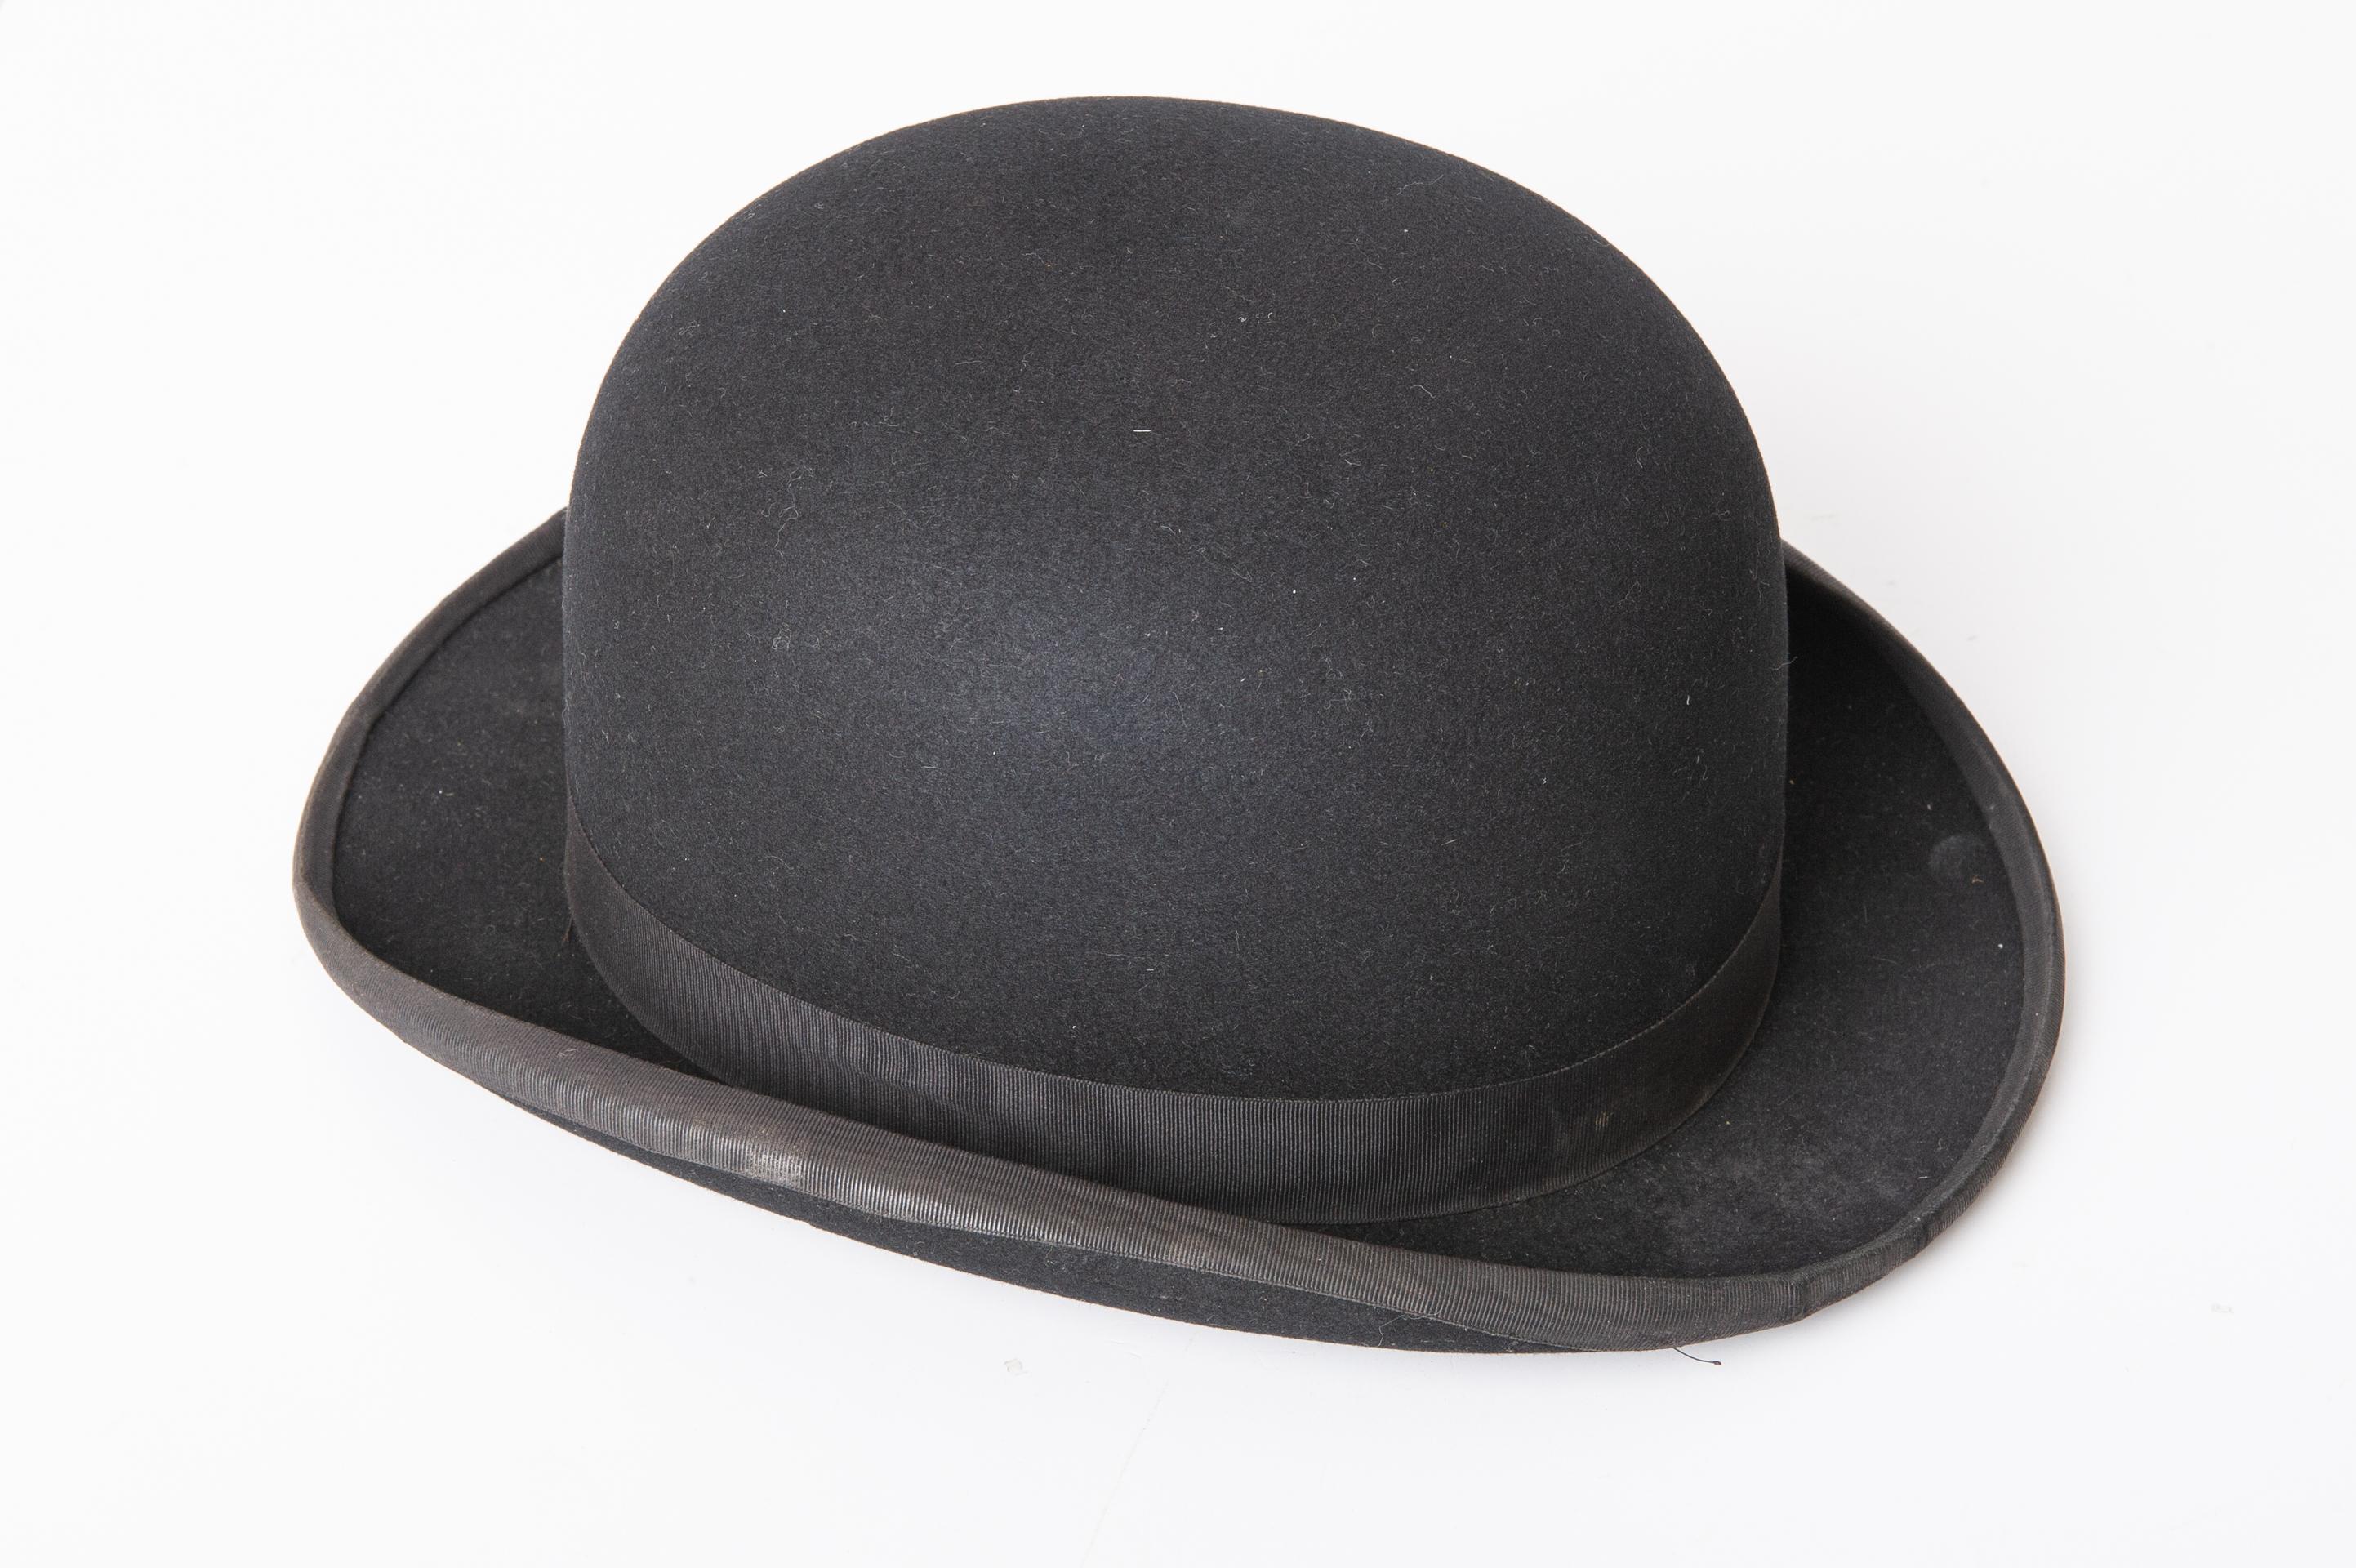 From left : ------------Also sold individually---------------
1) ref. O/5509 - London fashion Bowler Hat in black felt - 1920 about - 
   G.R.Dunn & Co.Ltd - Piccadilly Circus - London -  A mainstay for both 
   nobleman and commoners, the bowler